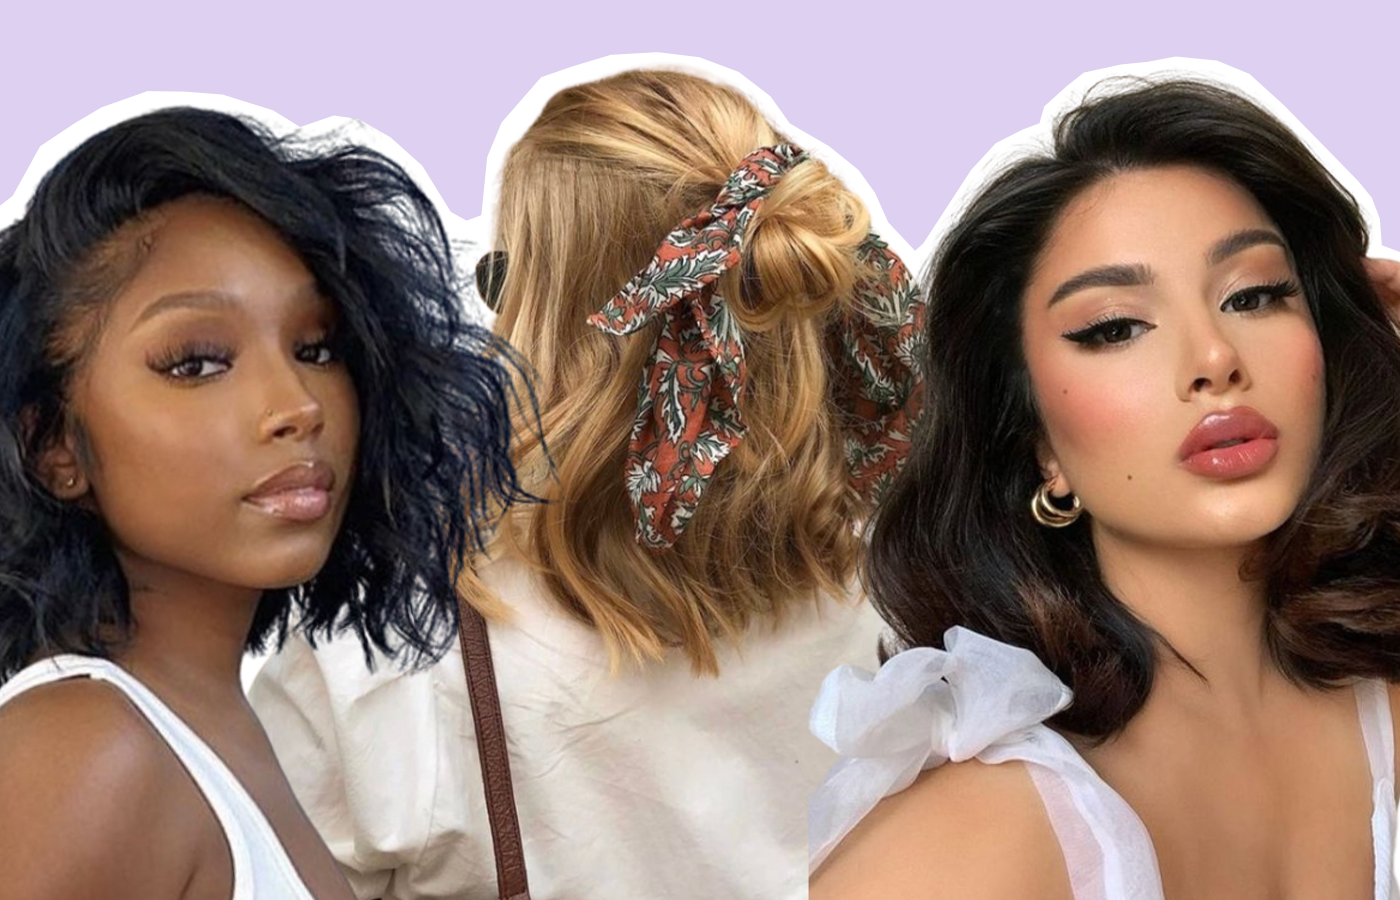 25 Prom Hairstyles for Girls with Short Hair ...